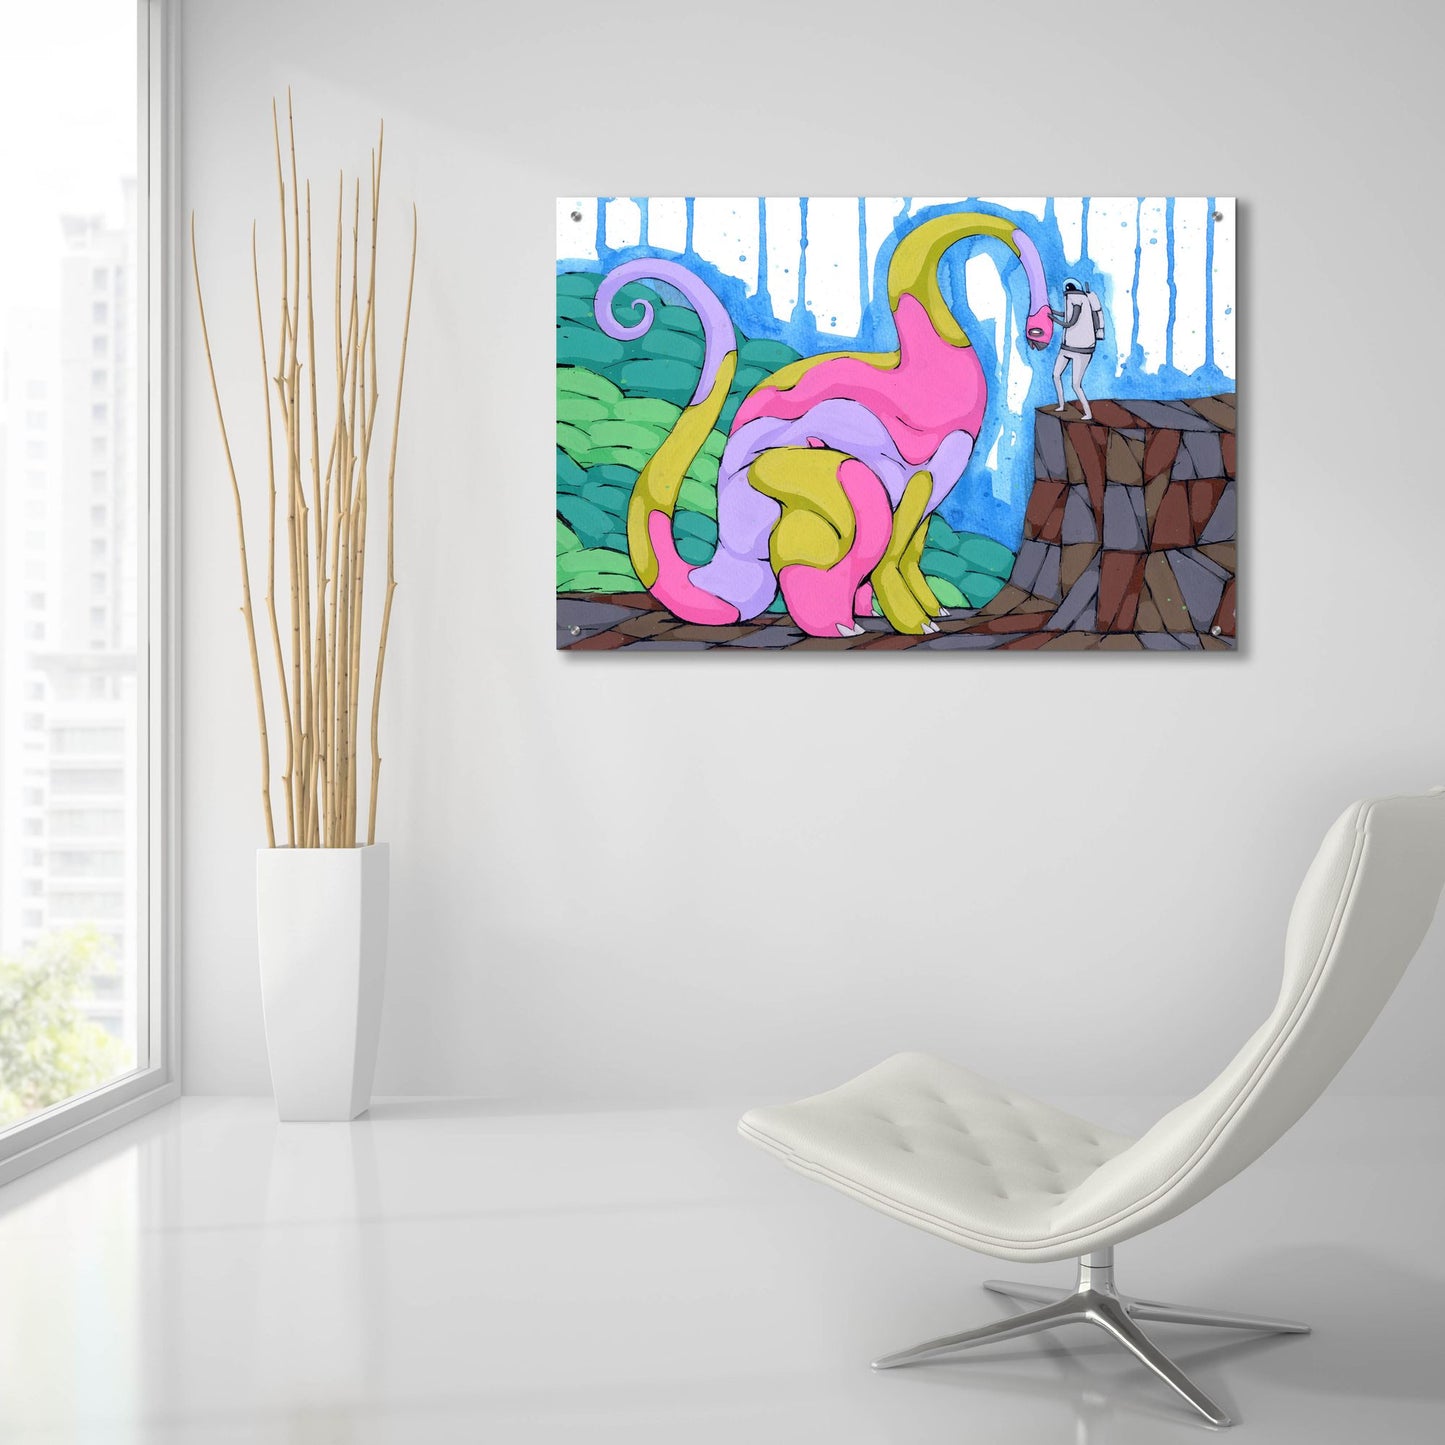 Epic Art 'Good To See You Too' by Ric Stultz, Acrylic Glass Wall Art,36x24